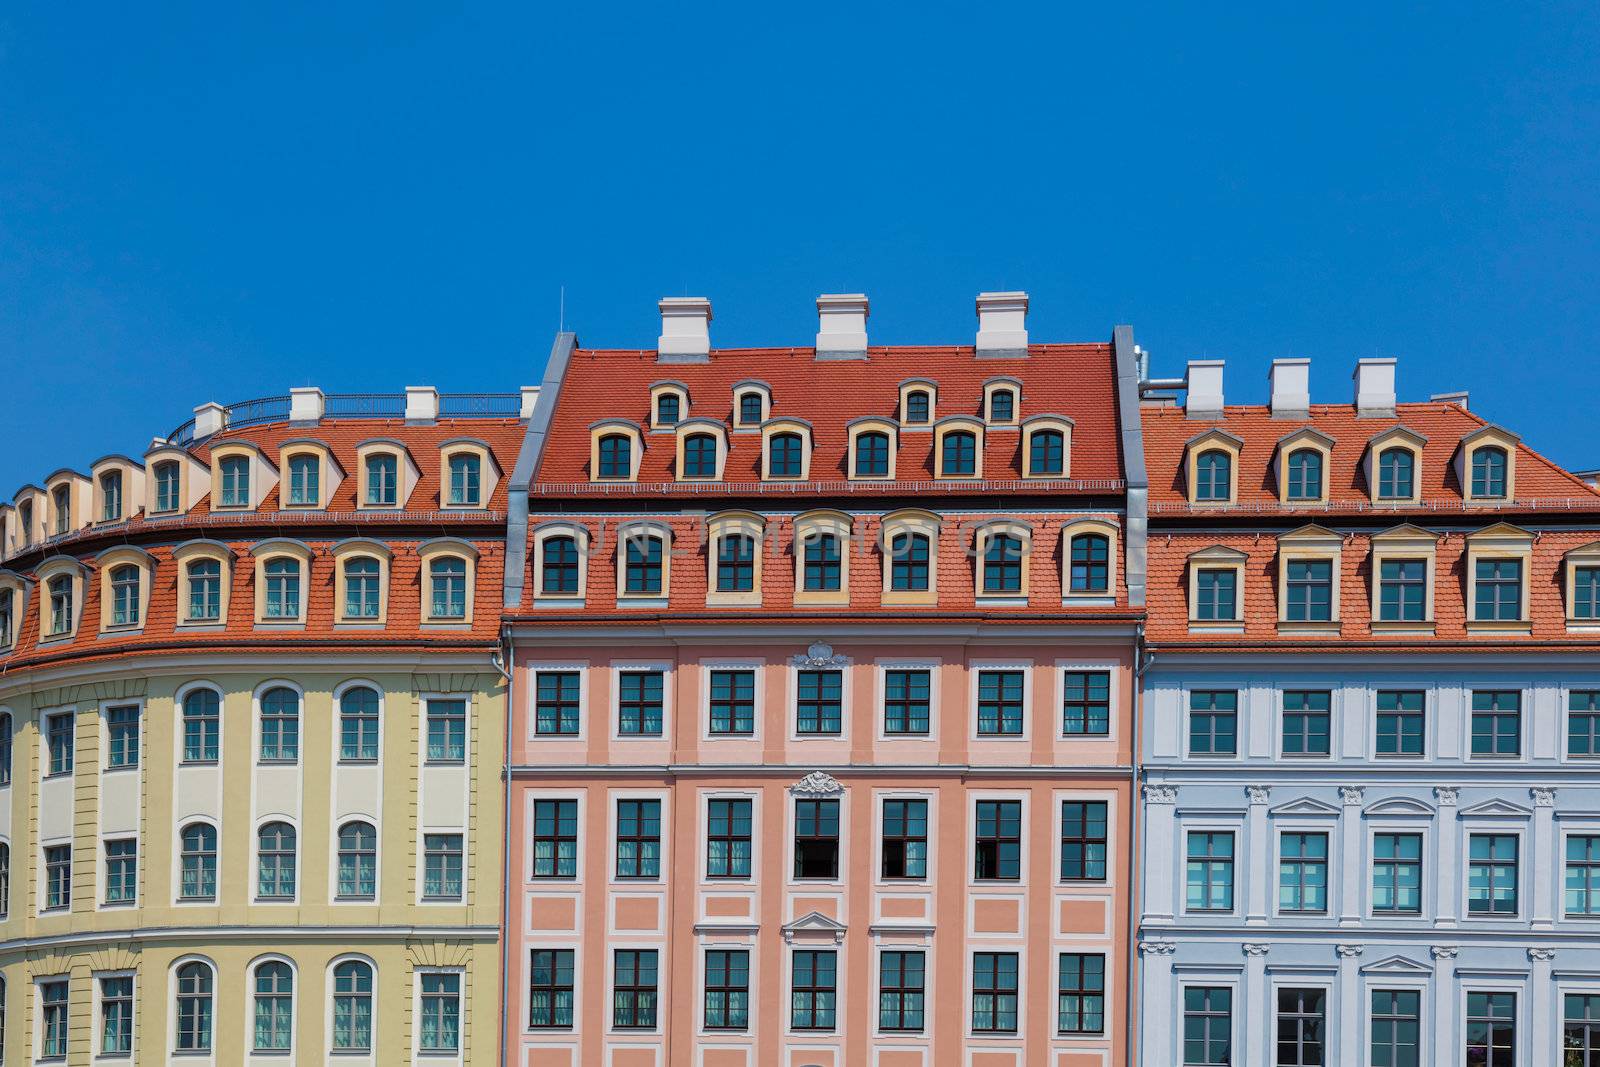 House facades on the Neumarkt in Dresden, Germany